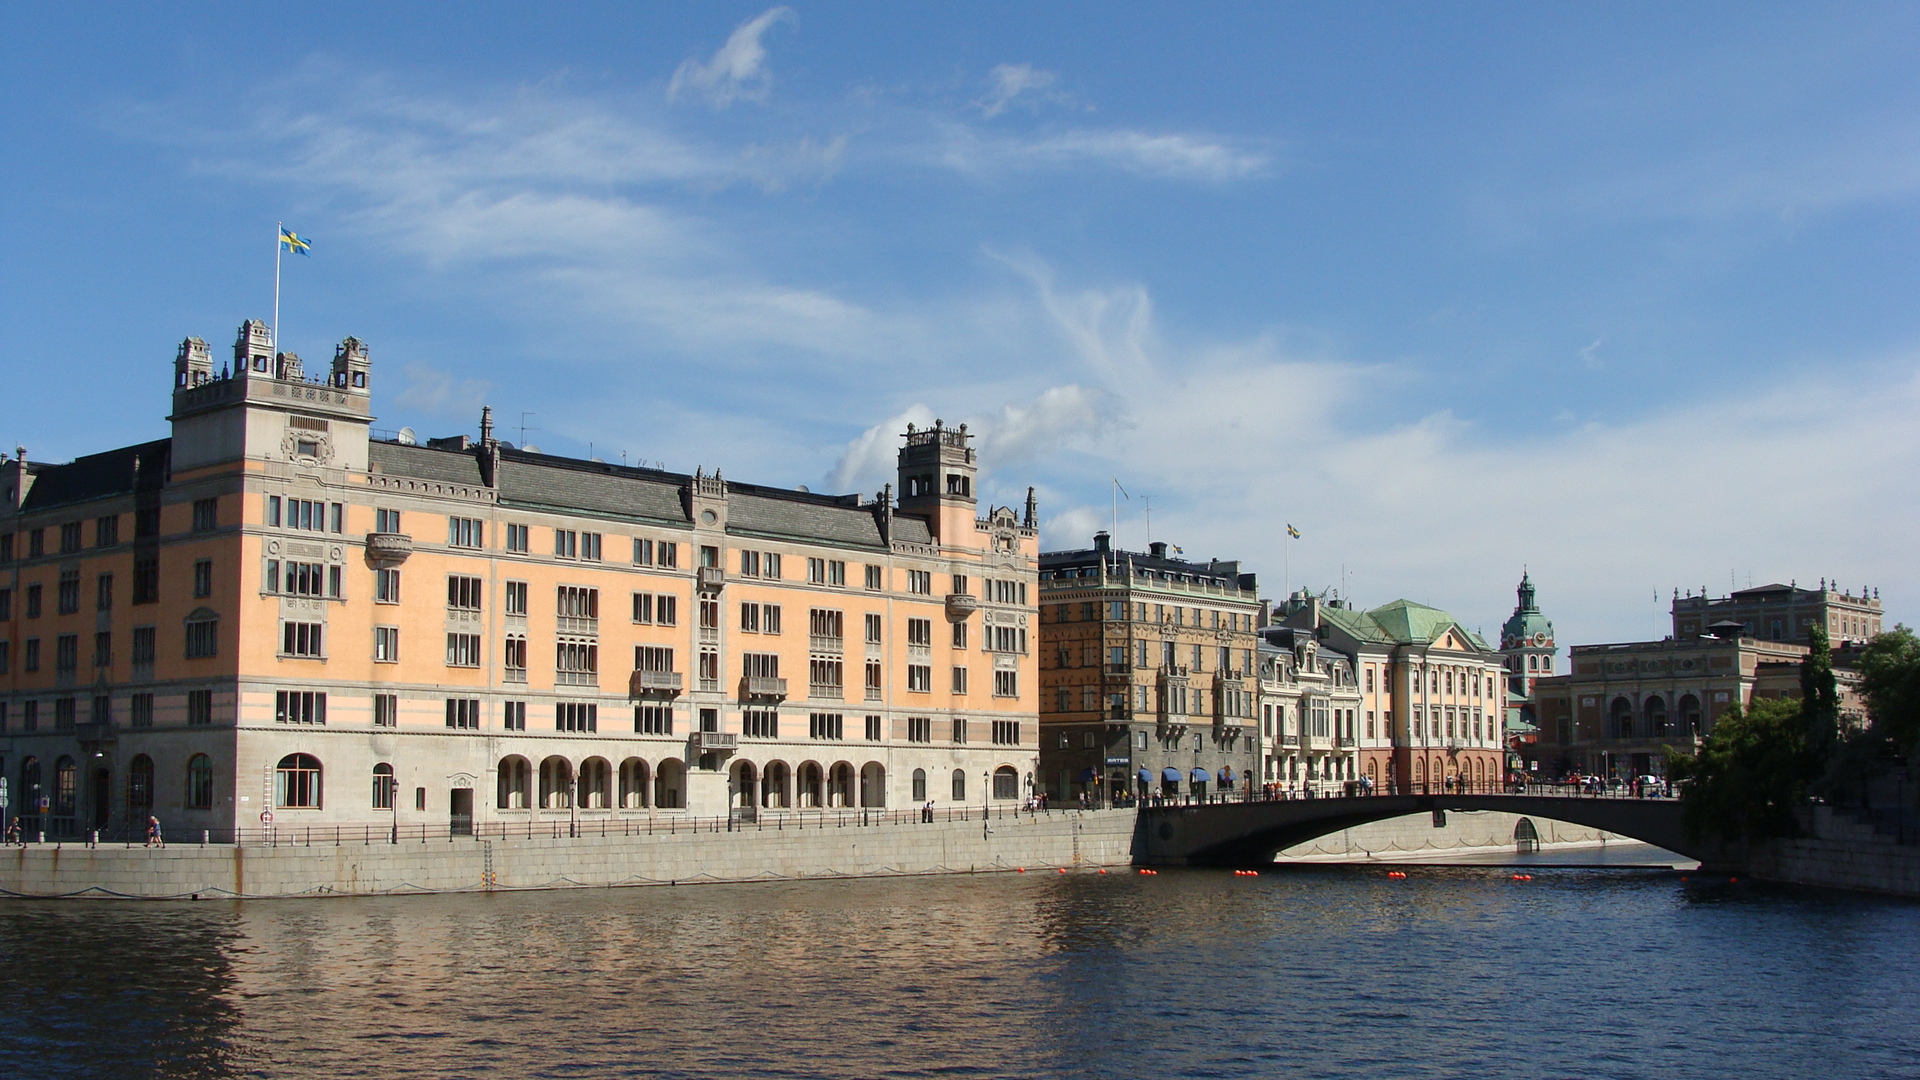 Rosenbad - Office of the Prime Minister and Ministry of Justice - Stockholm